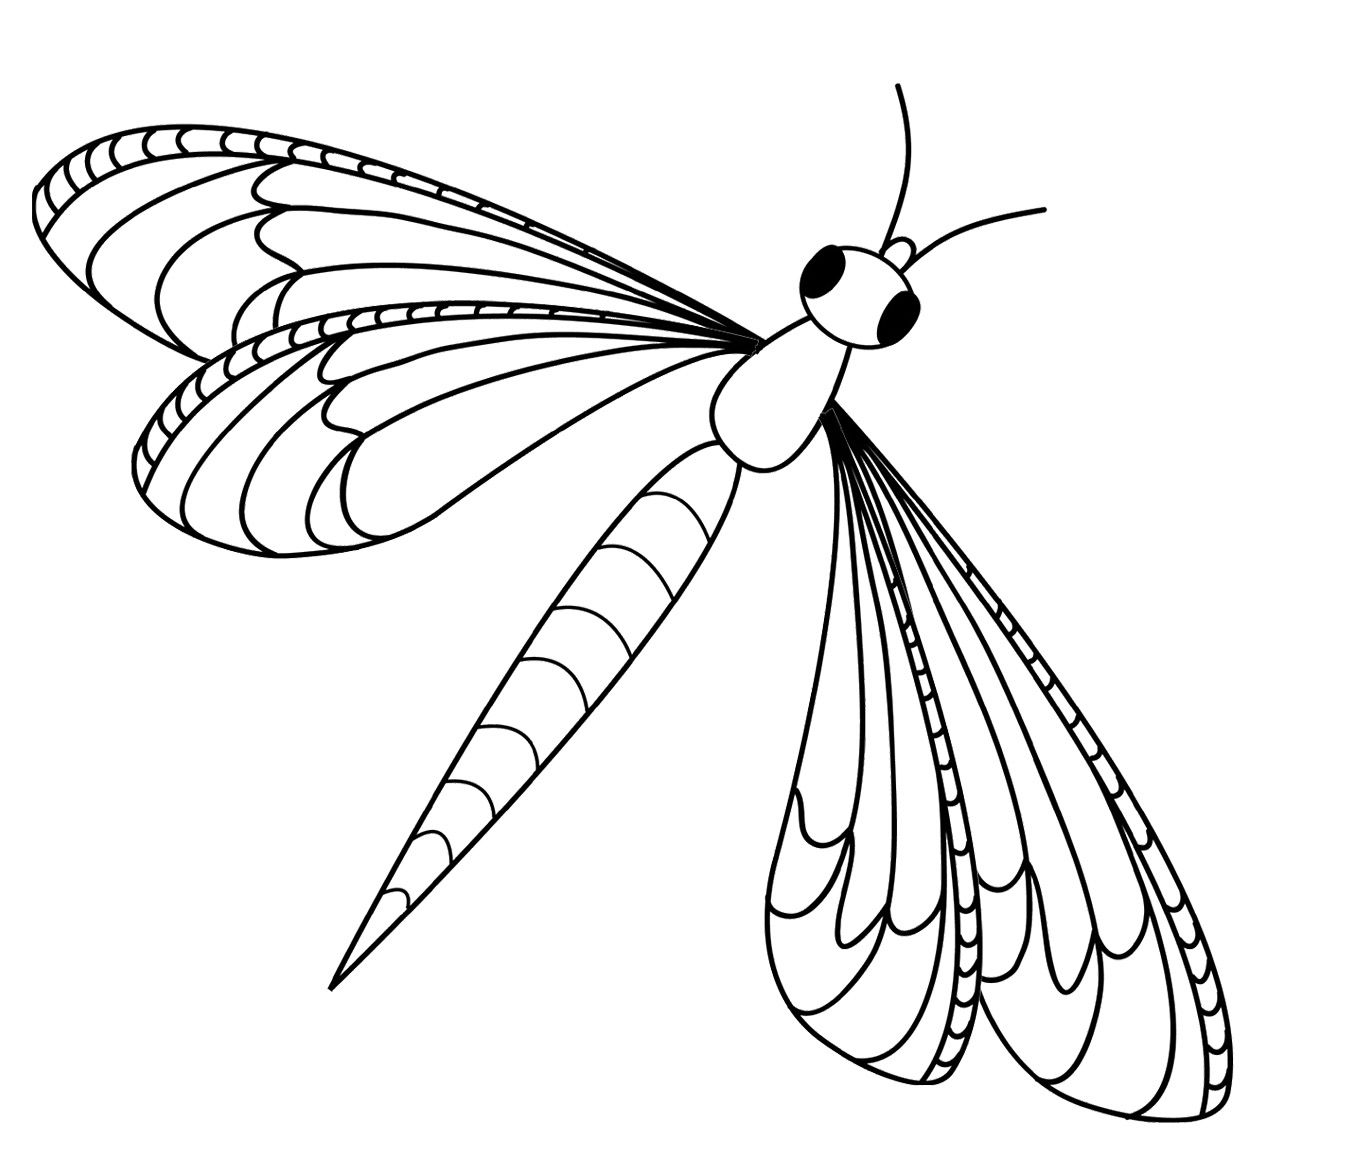 Printable dragonfly coloring pages coloring pages cartoon coloring pages free printable coloring pages